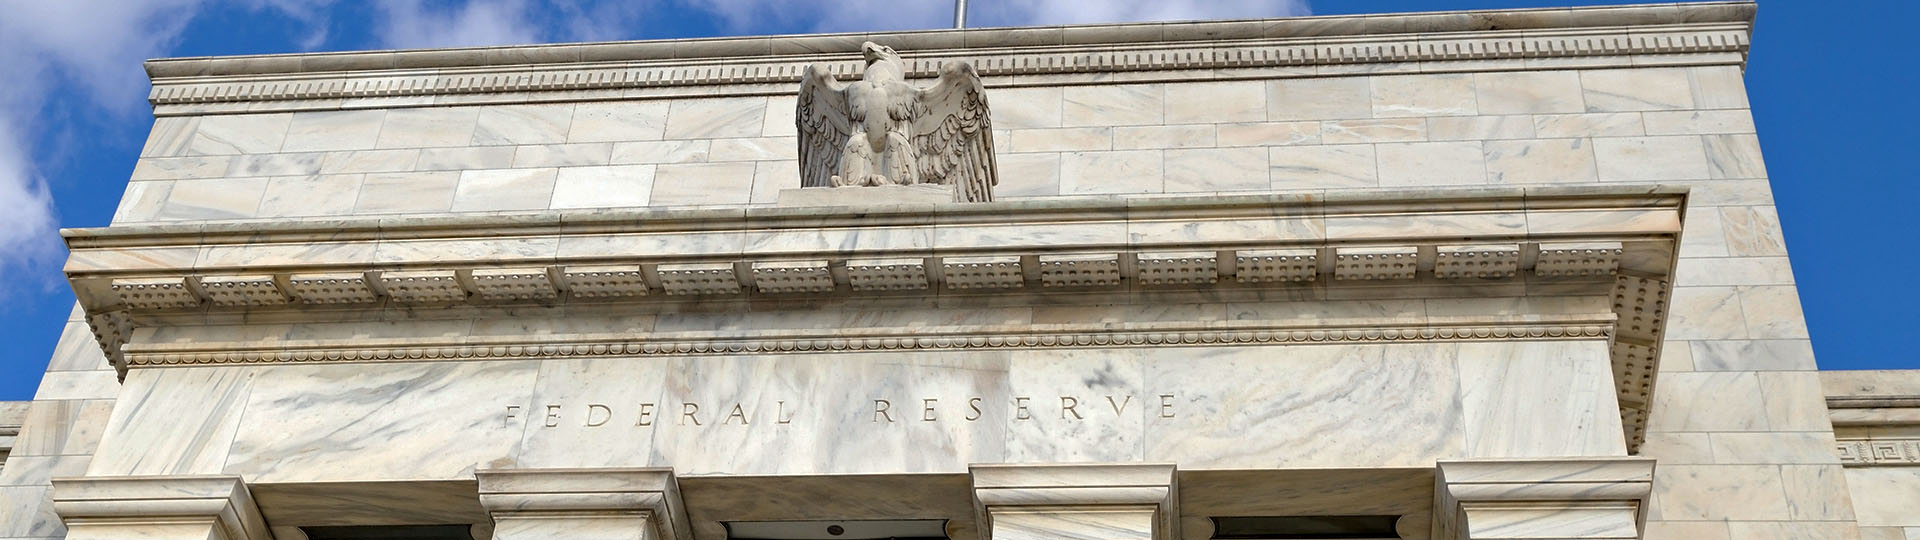 Closeup of the Federal Reserve Bank in Washington DC